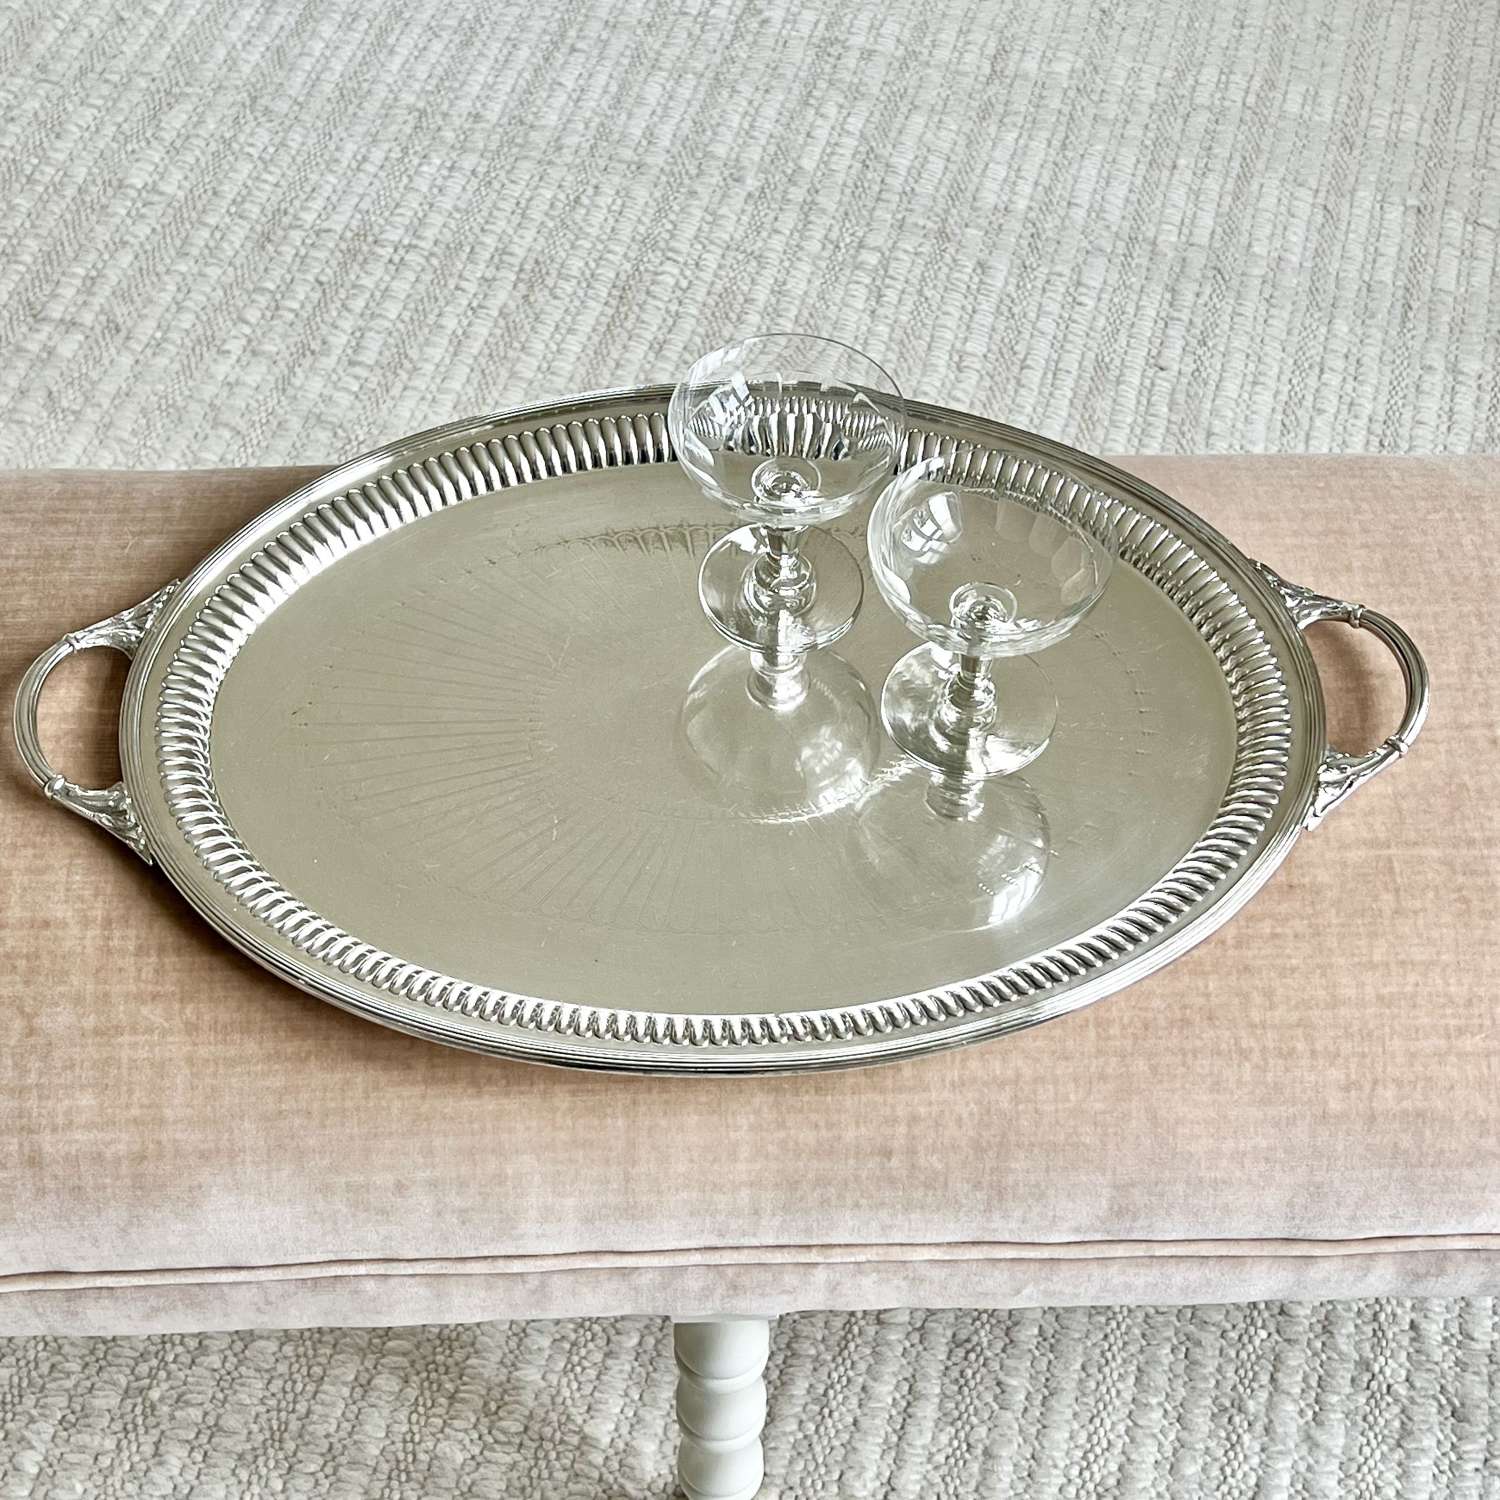 Fine Quality Silver Plated Serving Tray By William Hutton